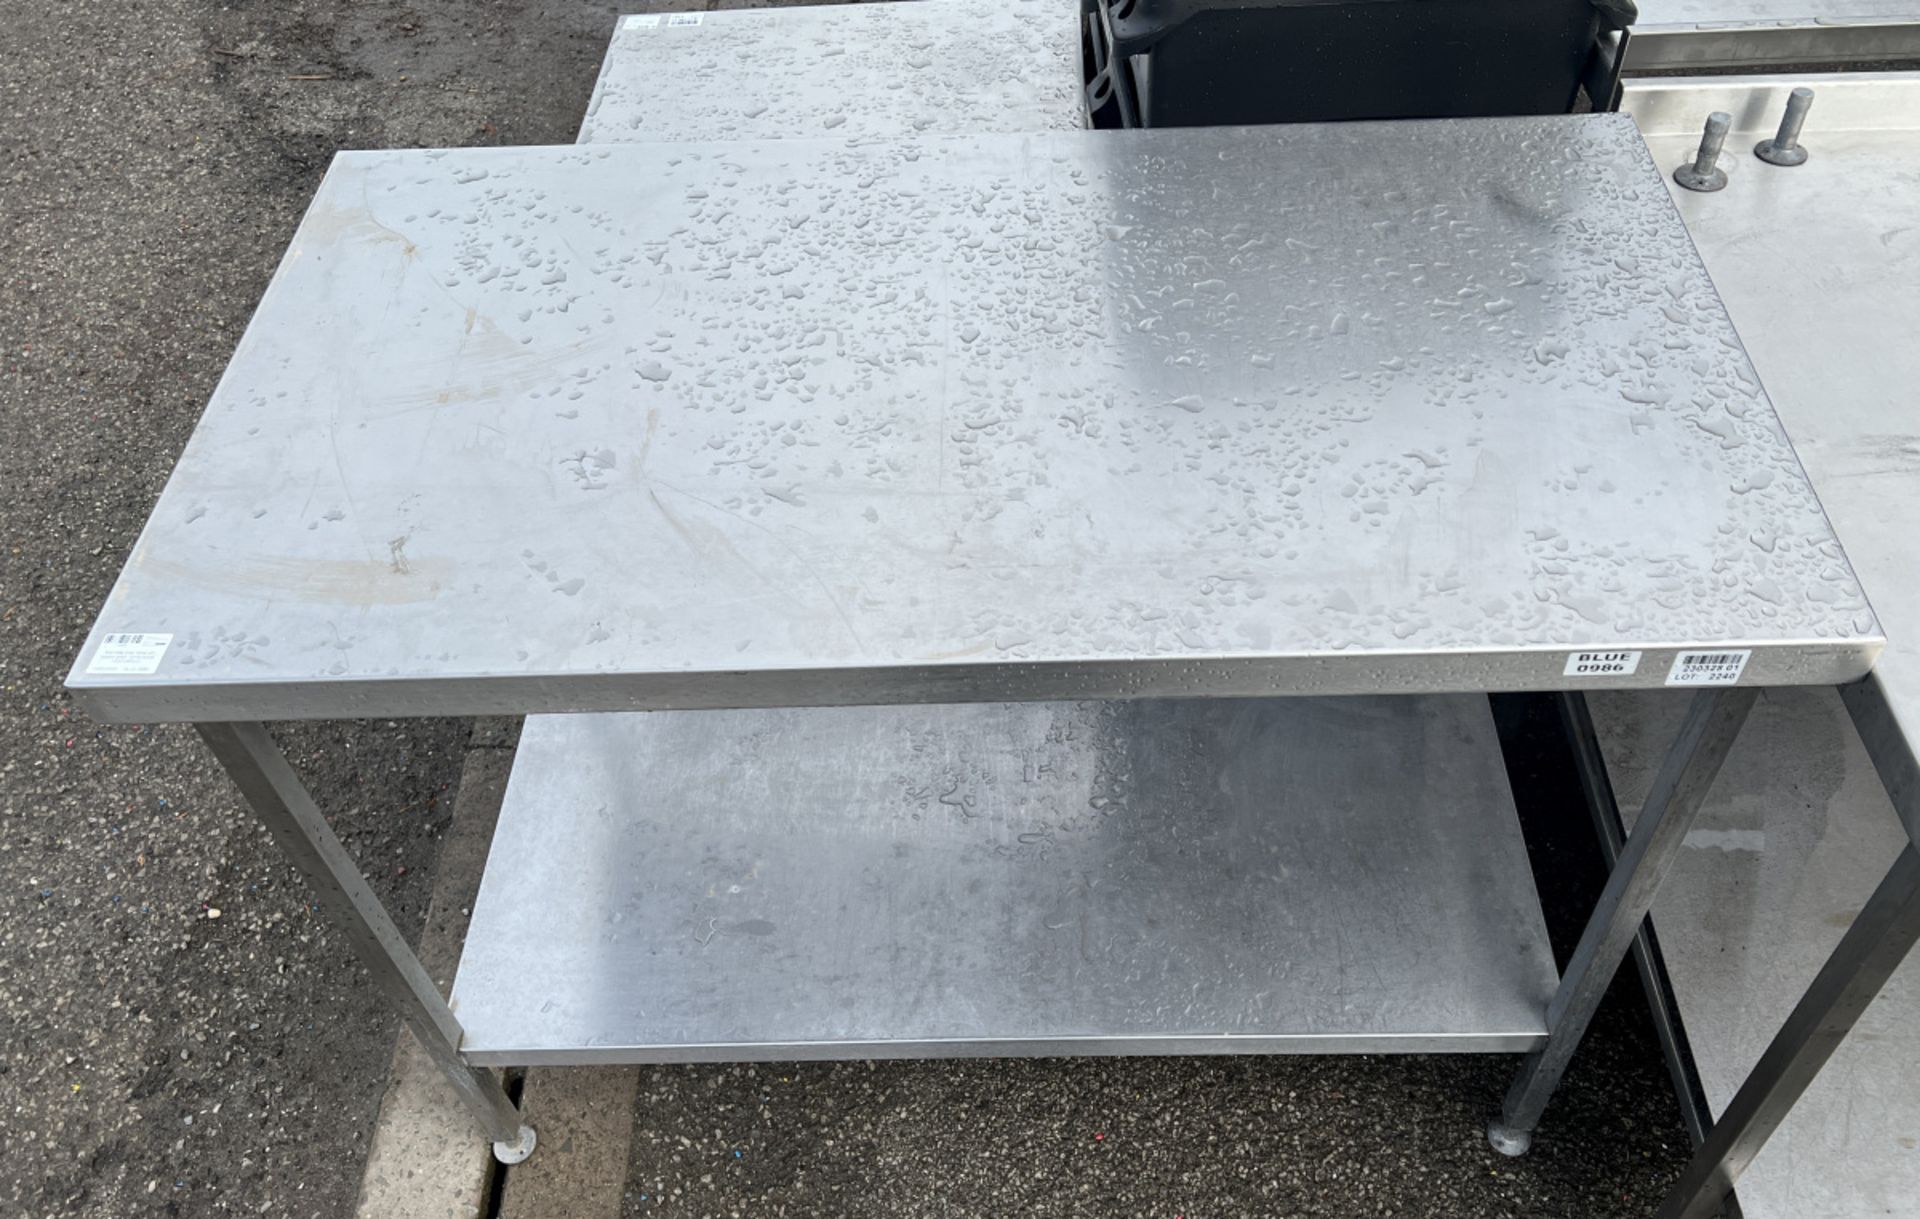 Stainless steel table with bottom shelf - dimensions: 130 x 70 x 90cm - Image 2 of 3